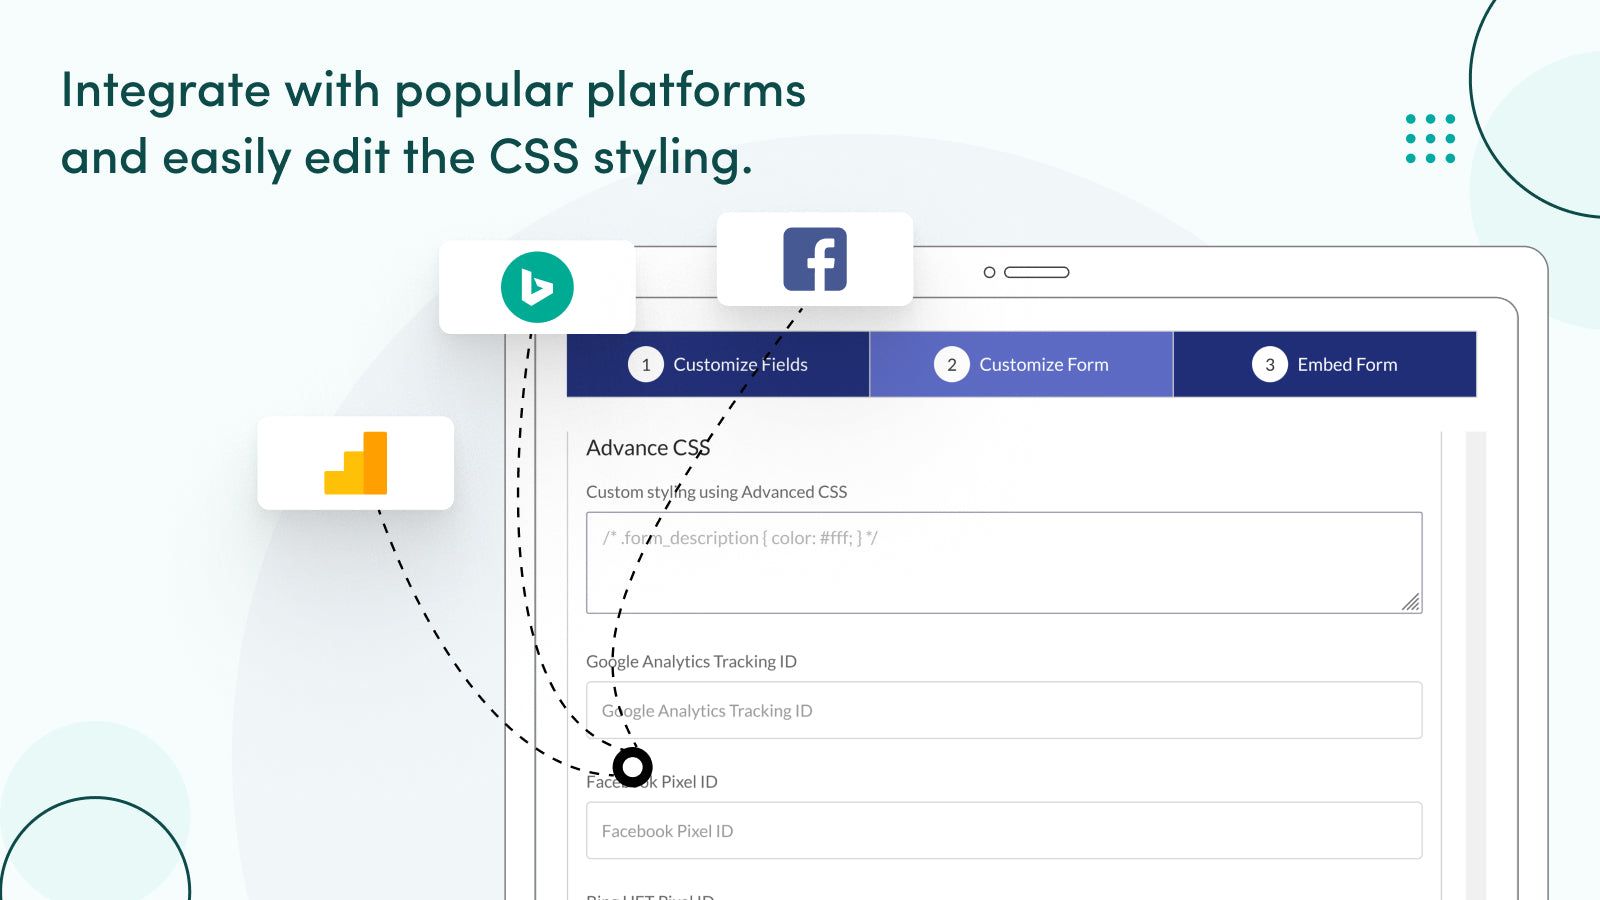 Update CSS styling and easily integrate with major platforms.